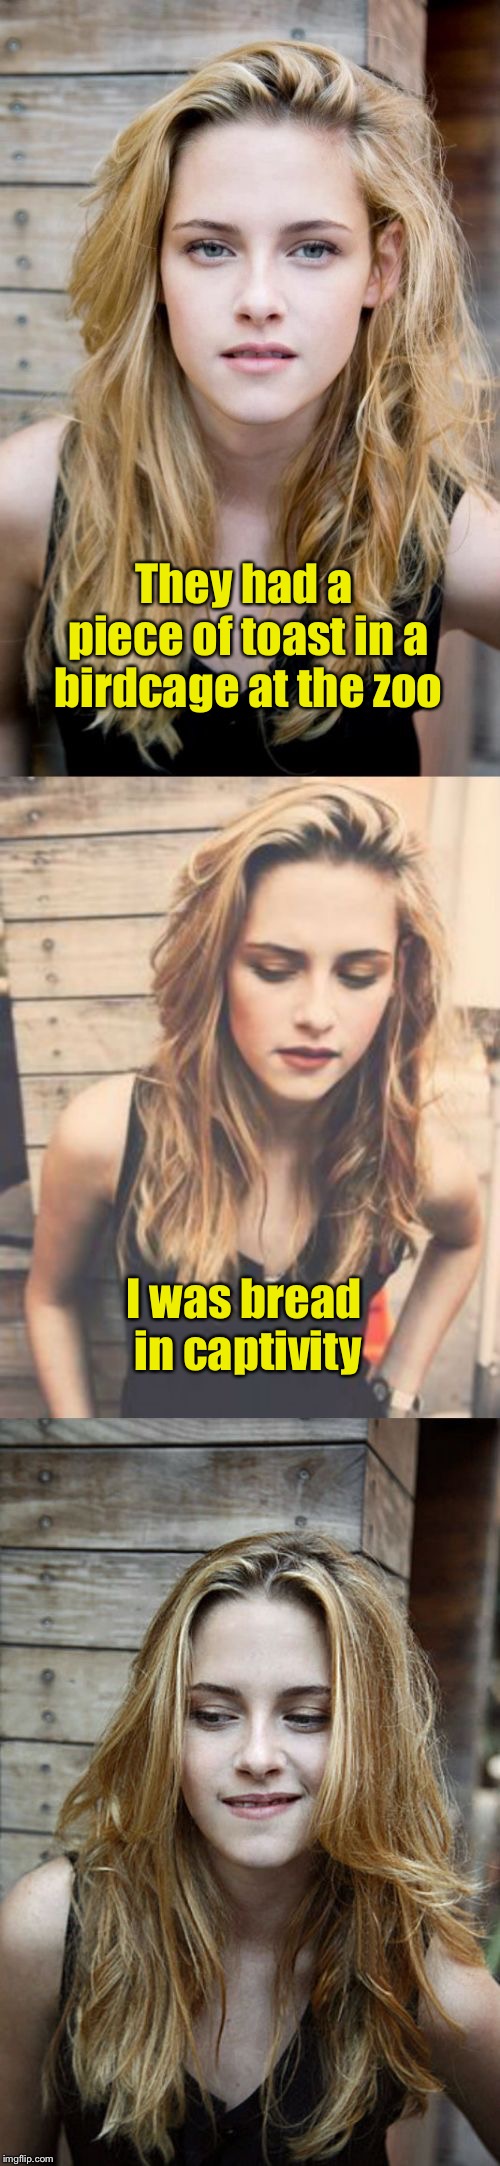 Bad Pun Kristen Stewart 2 | They had a piece of toast in a birdcage at the zoo; I was bread in captivity | image tagged in bad pun kristen stewart 2 | made w/ Imgflip meme maker